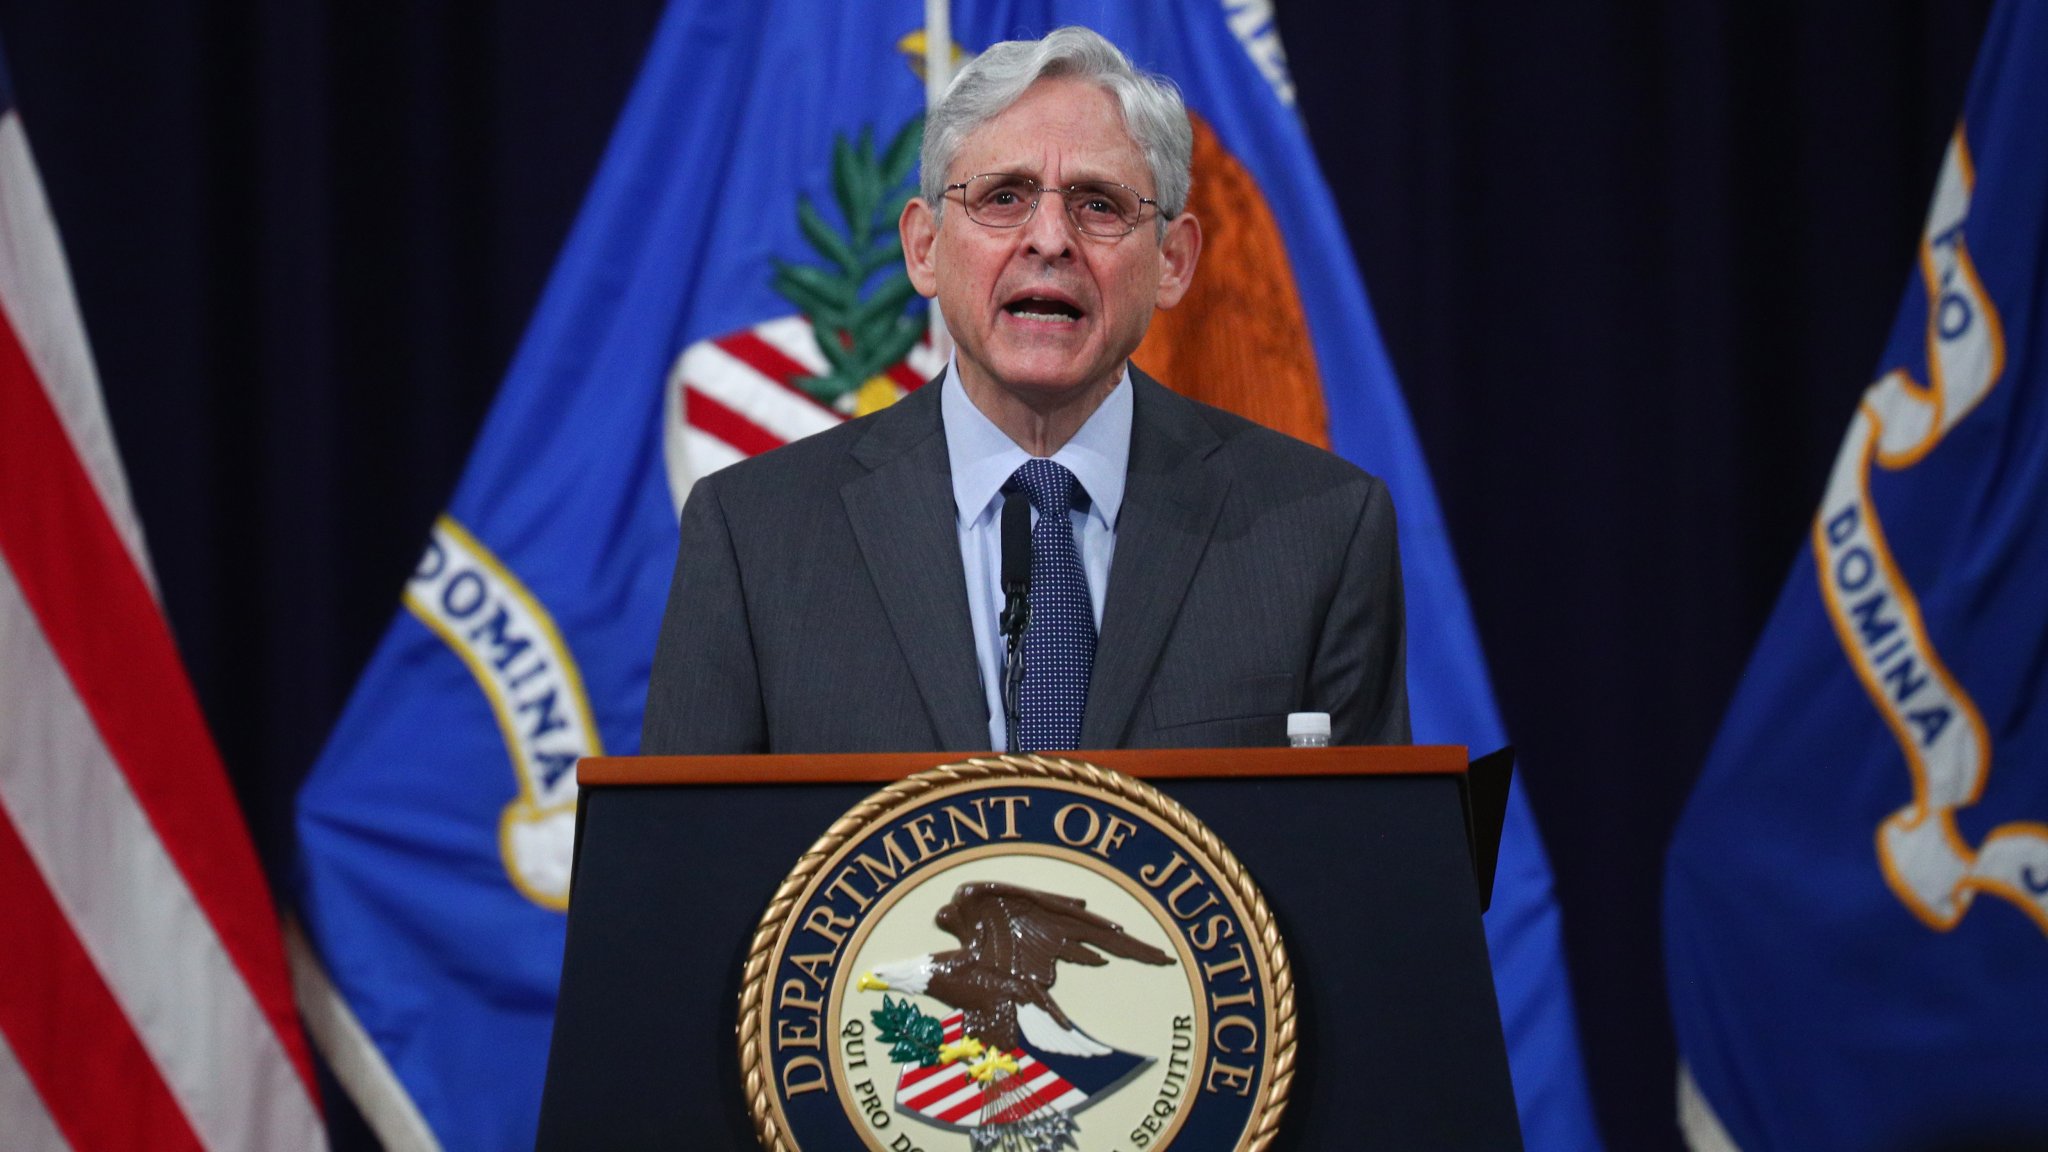 AG Garland Vows To Defend Voting Rights As The 'Cornerstone' Of American Democracy